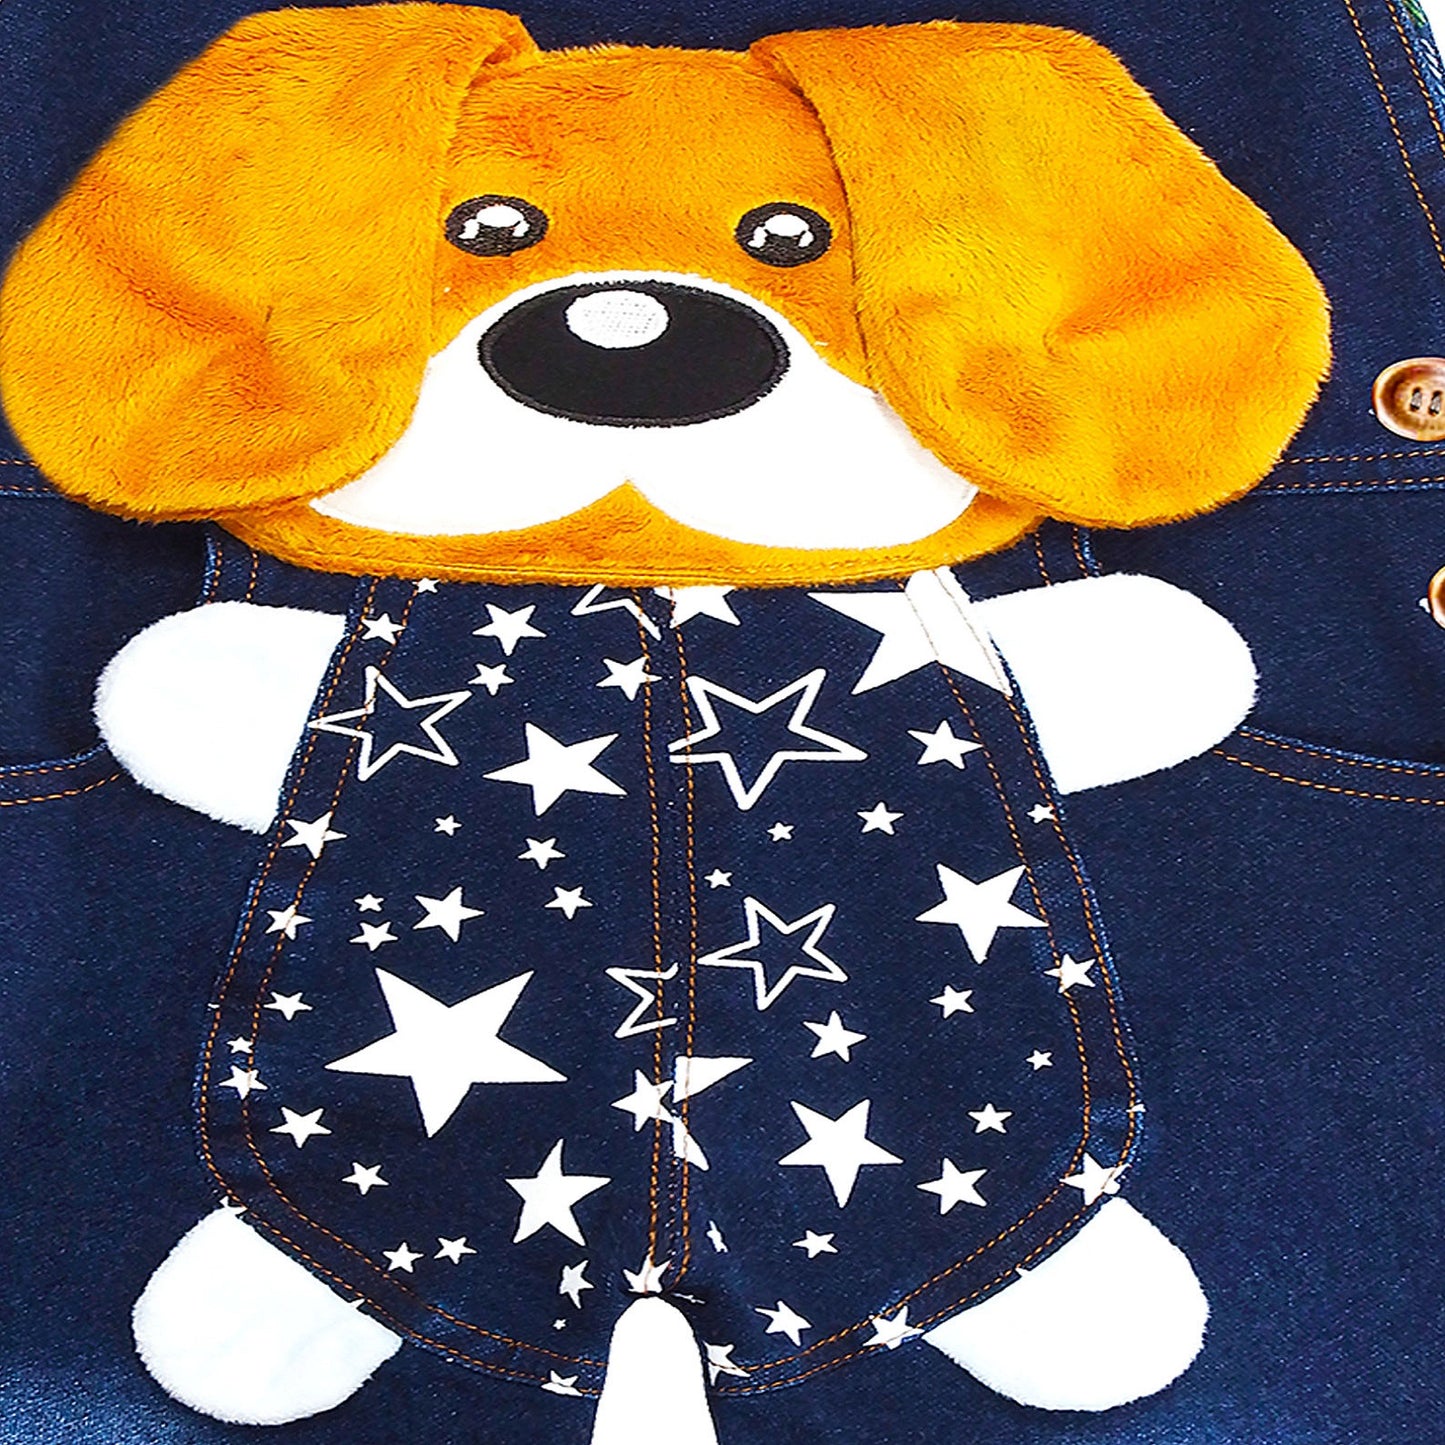 Baby Cotton 3D Cartoon Dog Safe Knitted Jeans Overalls